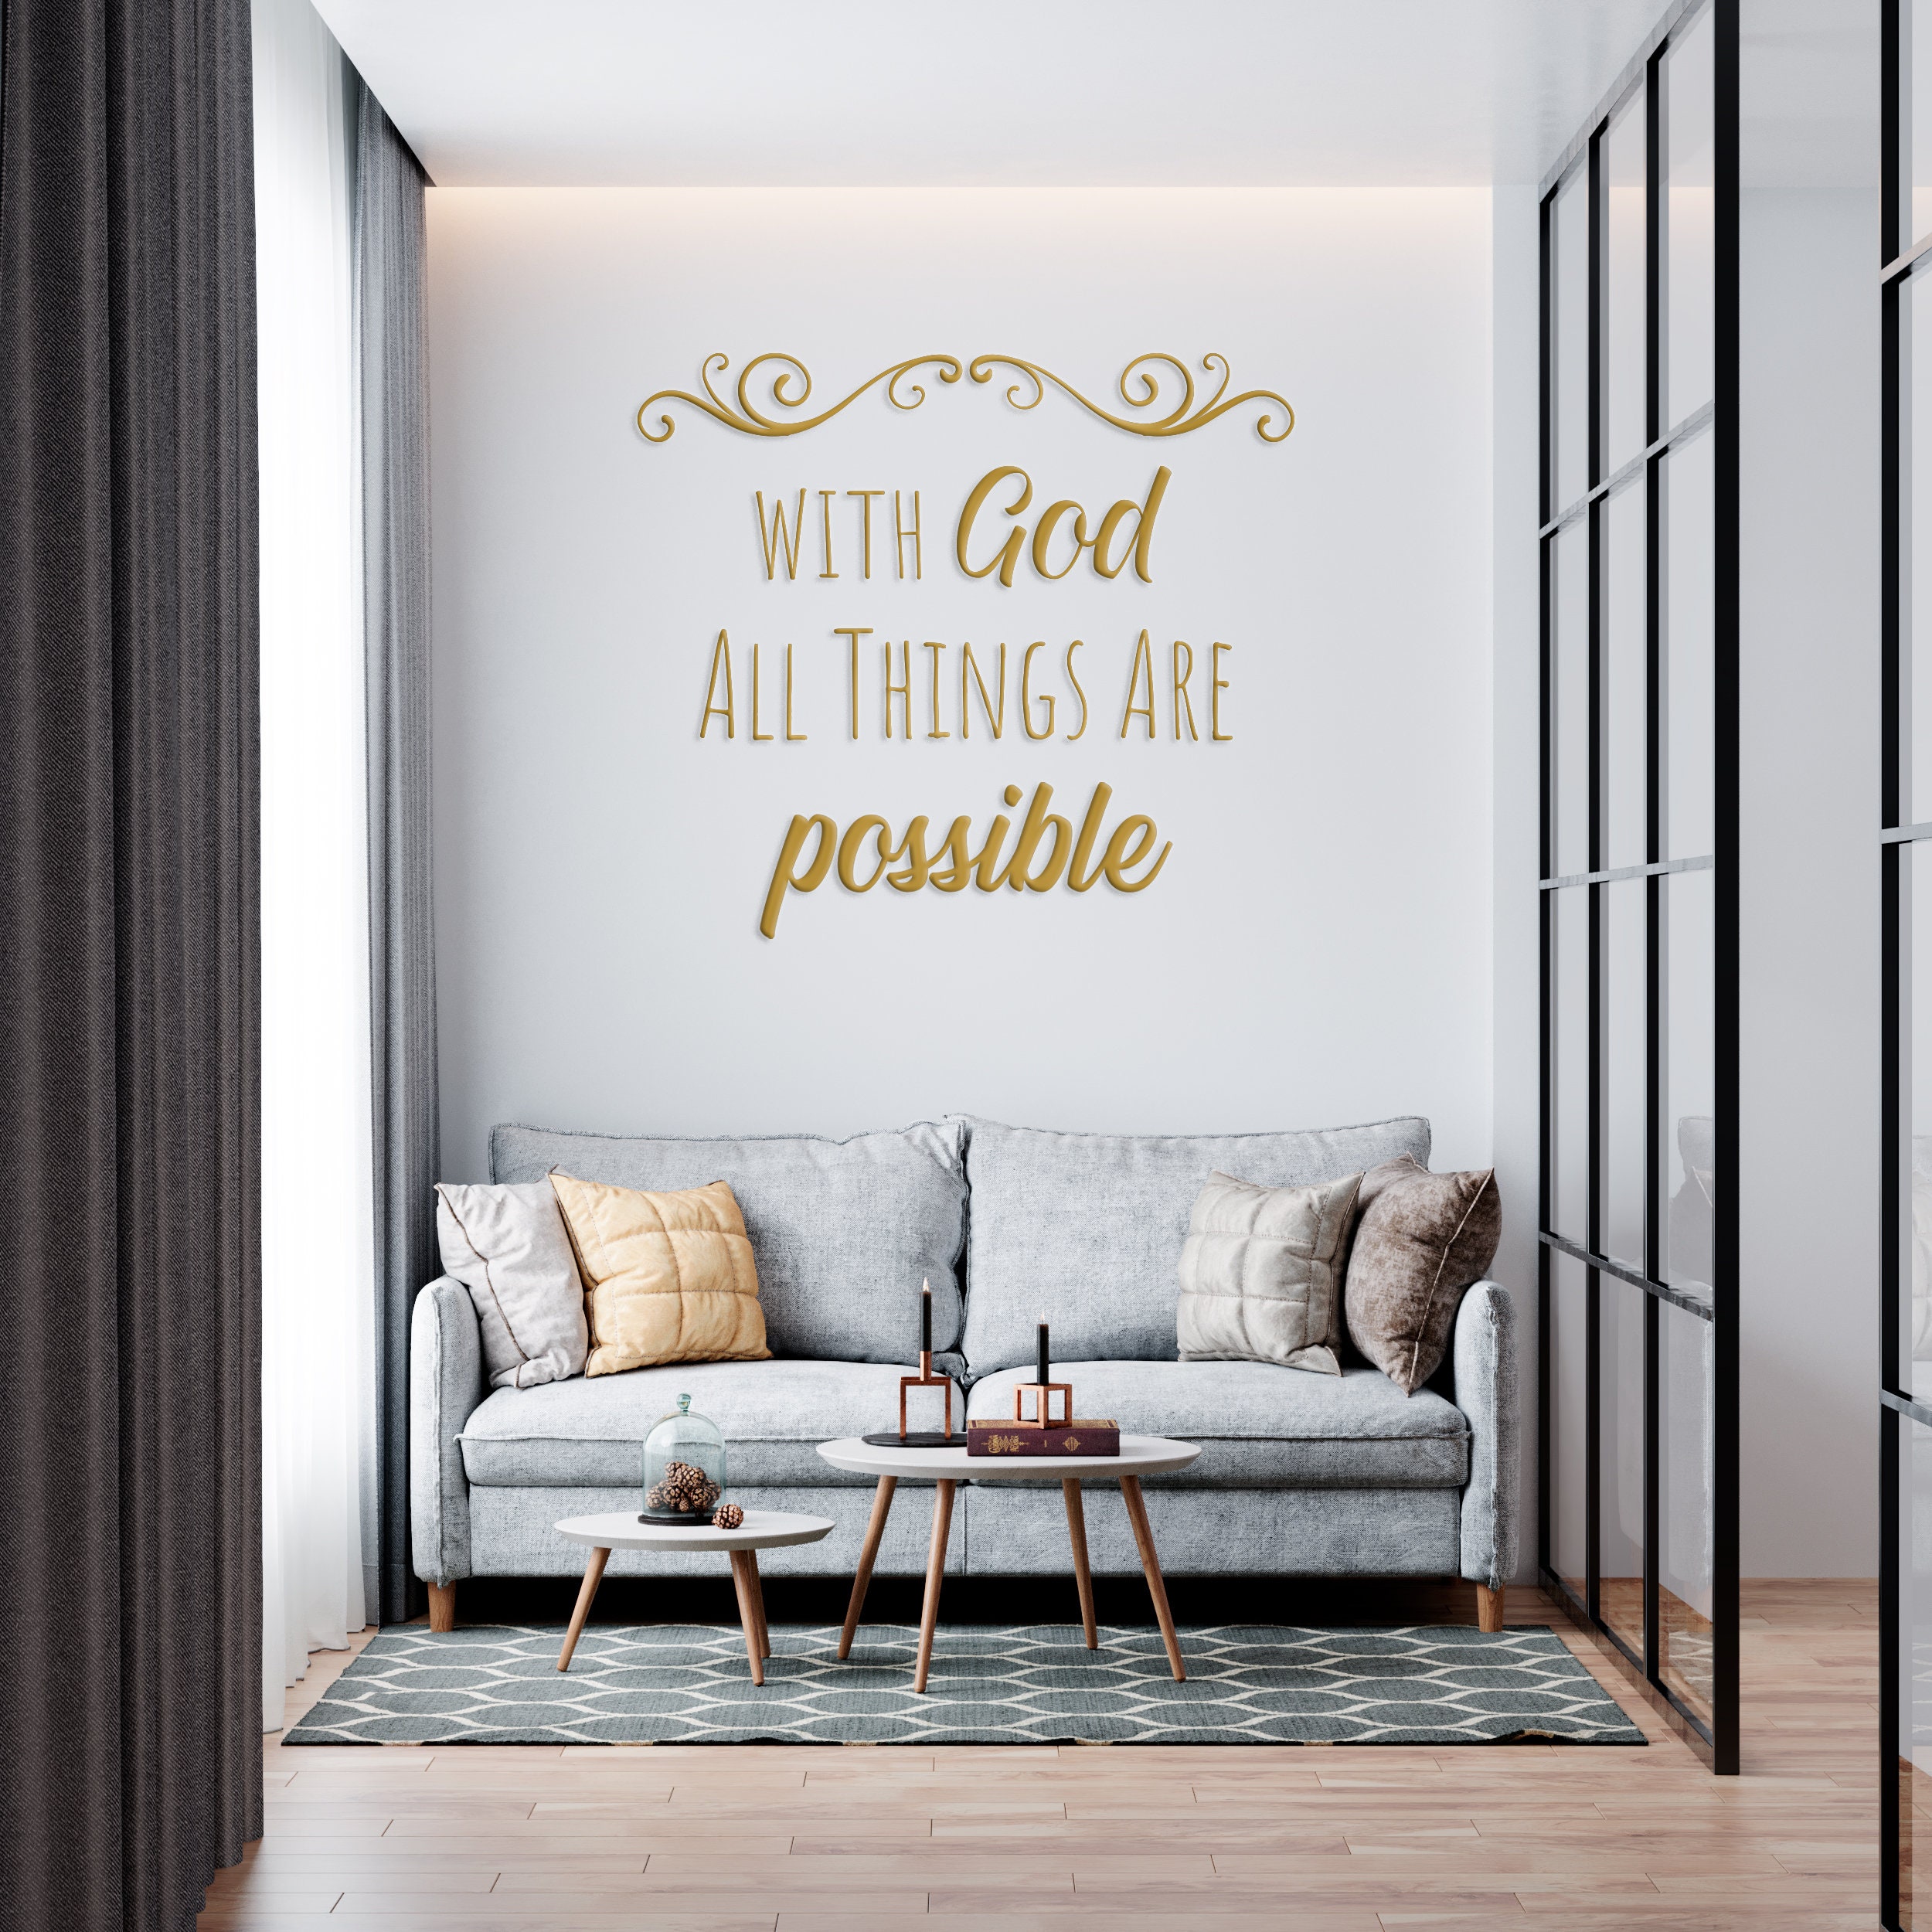 Vinyl With God All Things Are Possible Quote Decal Wall Sticker Arts Decor 